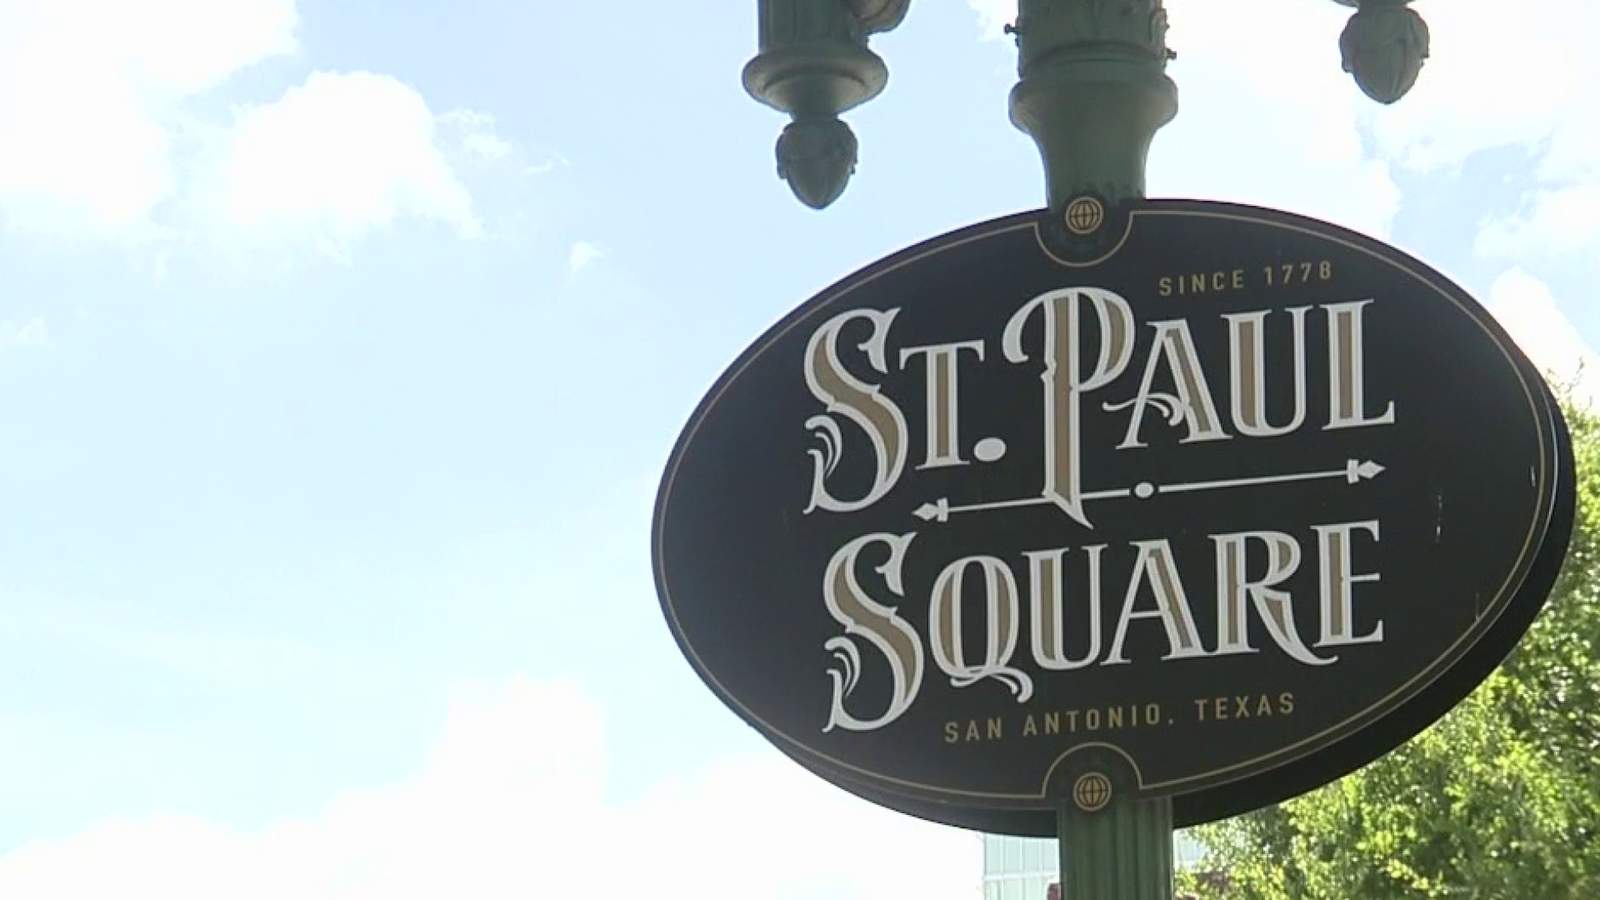 St. Paul Square business owners struggling to stay open, adapting to new normal amid pandemic